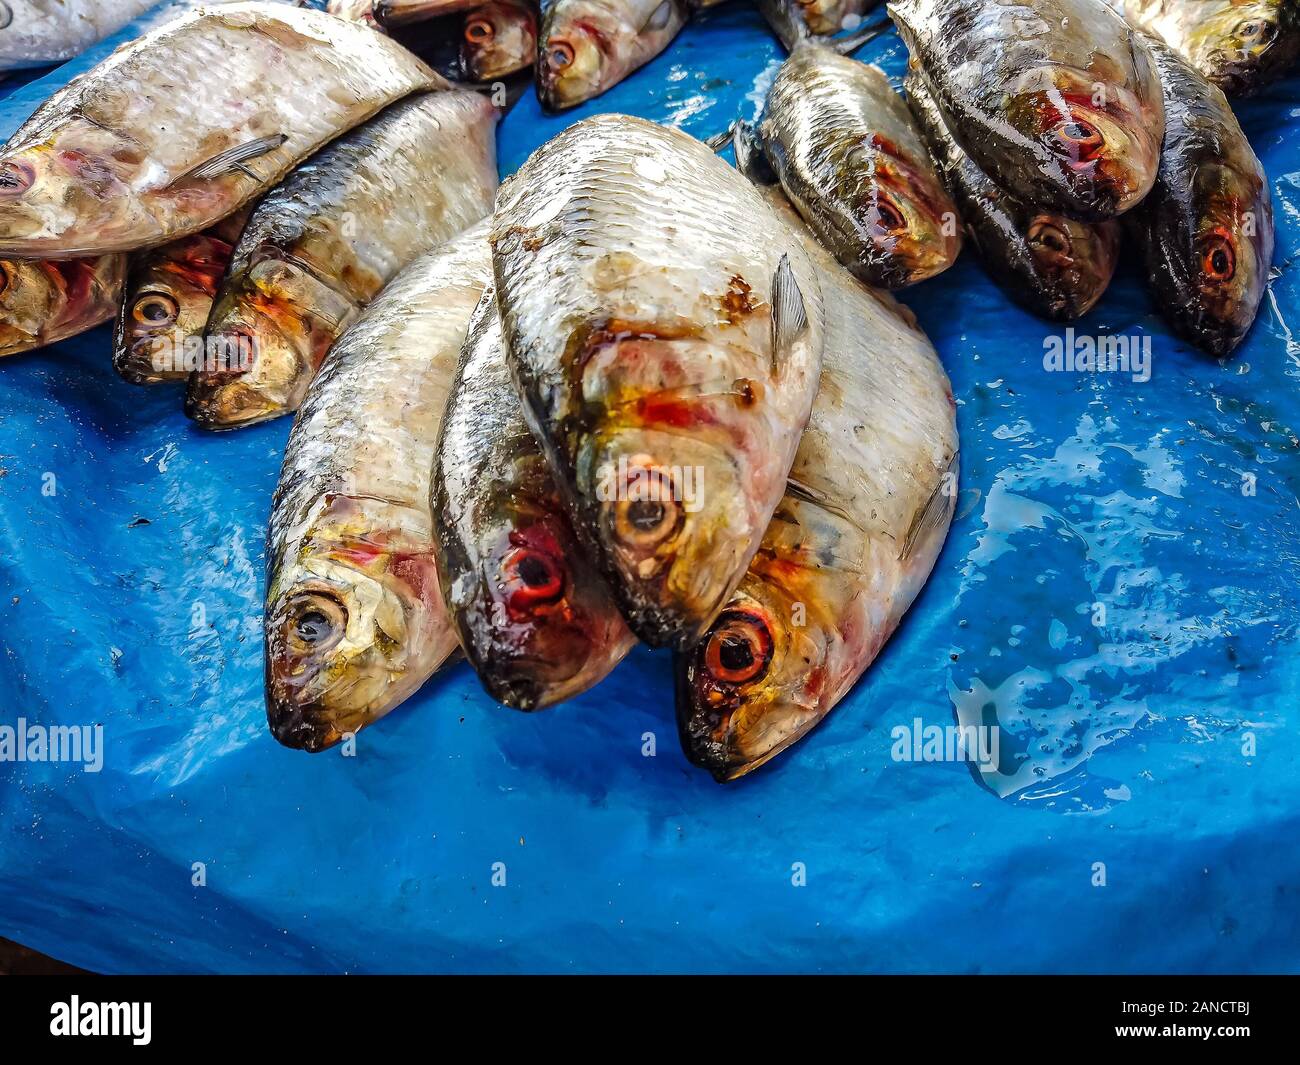 Fresh fish lies on a table at a fish market in Mbour, Senegal. It's near Dakar, Africa. They are large and small fish of different species. Stock Photo